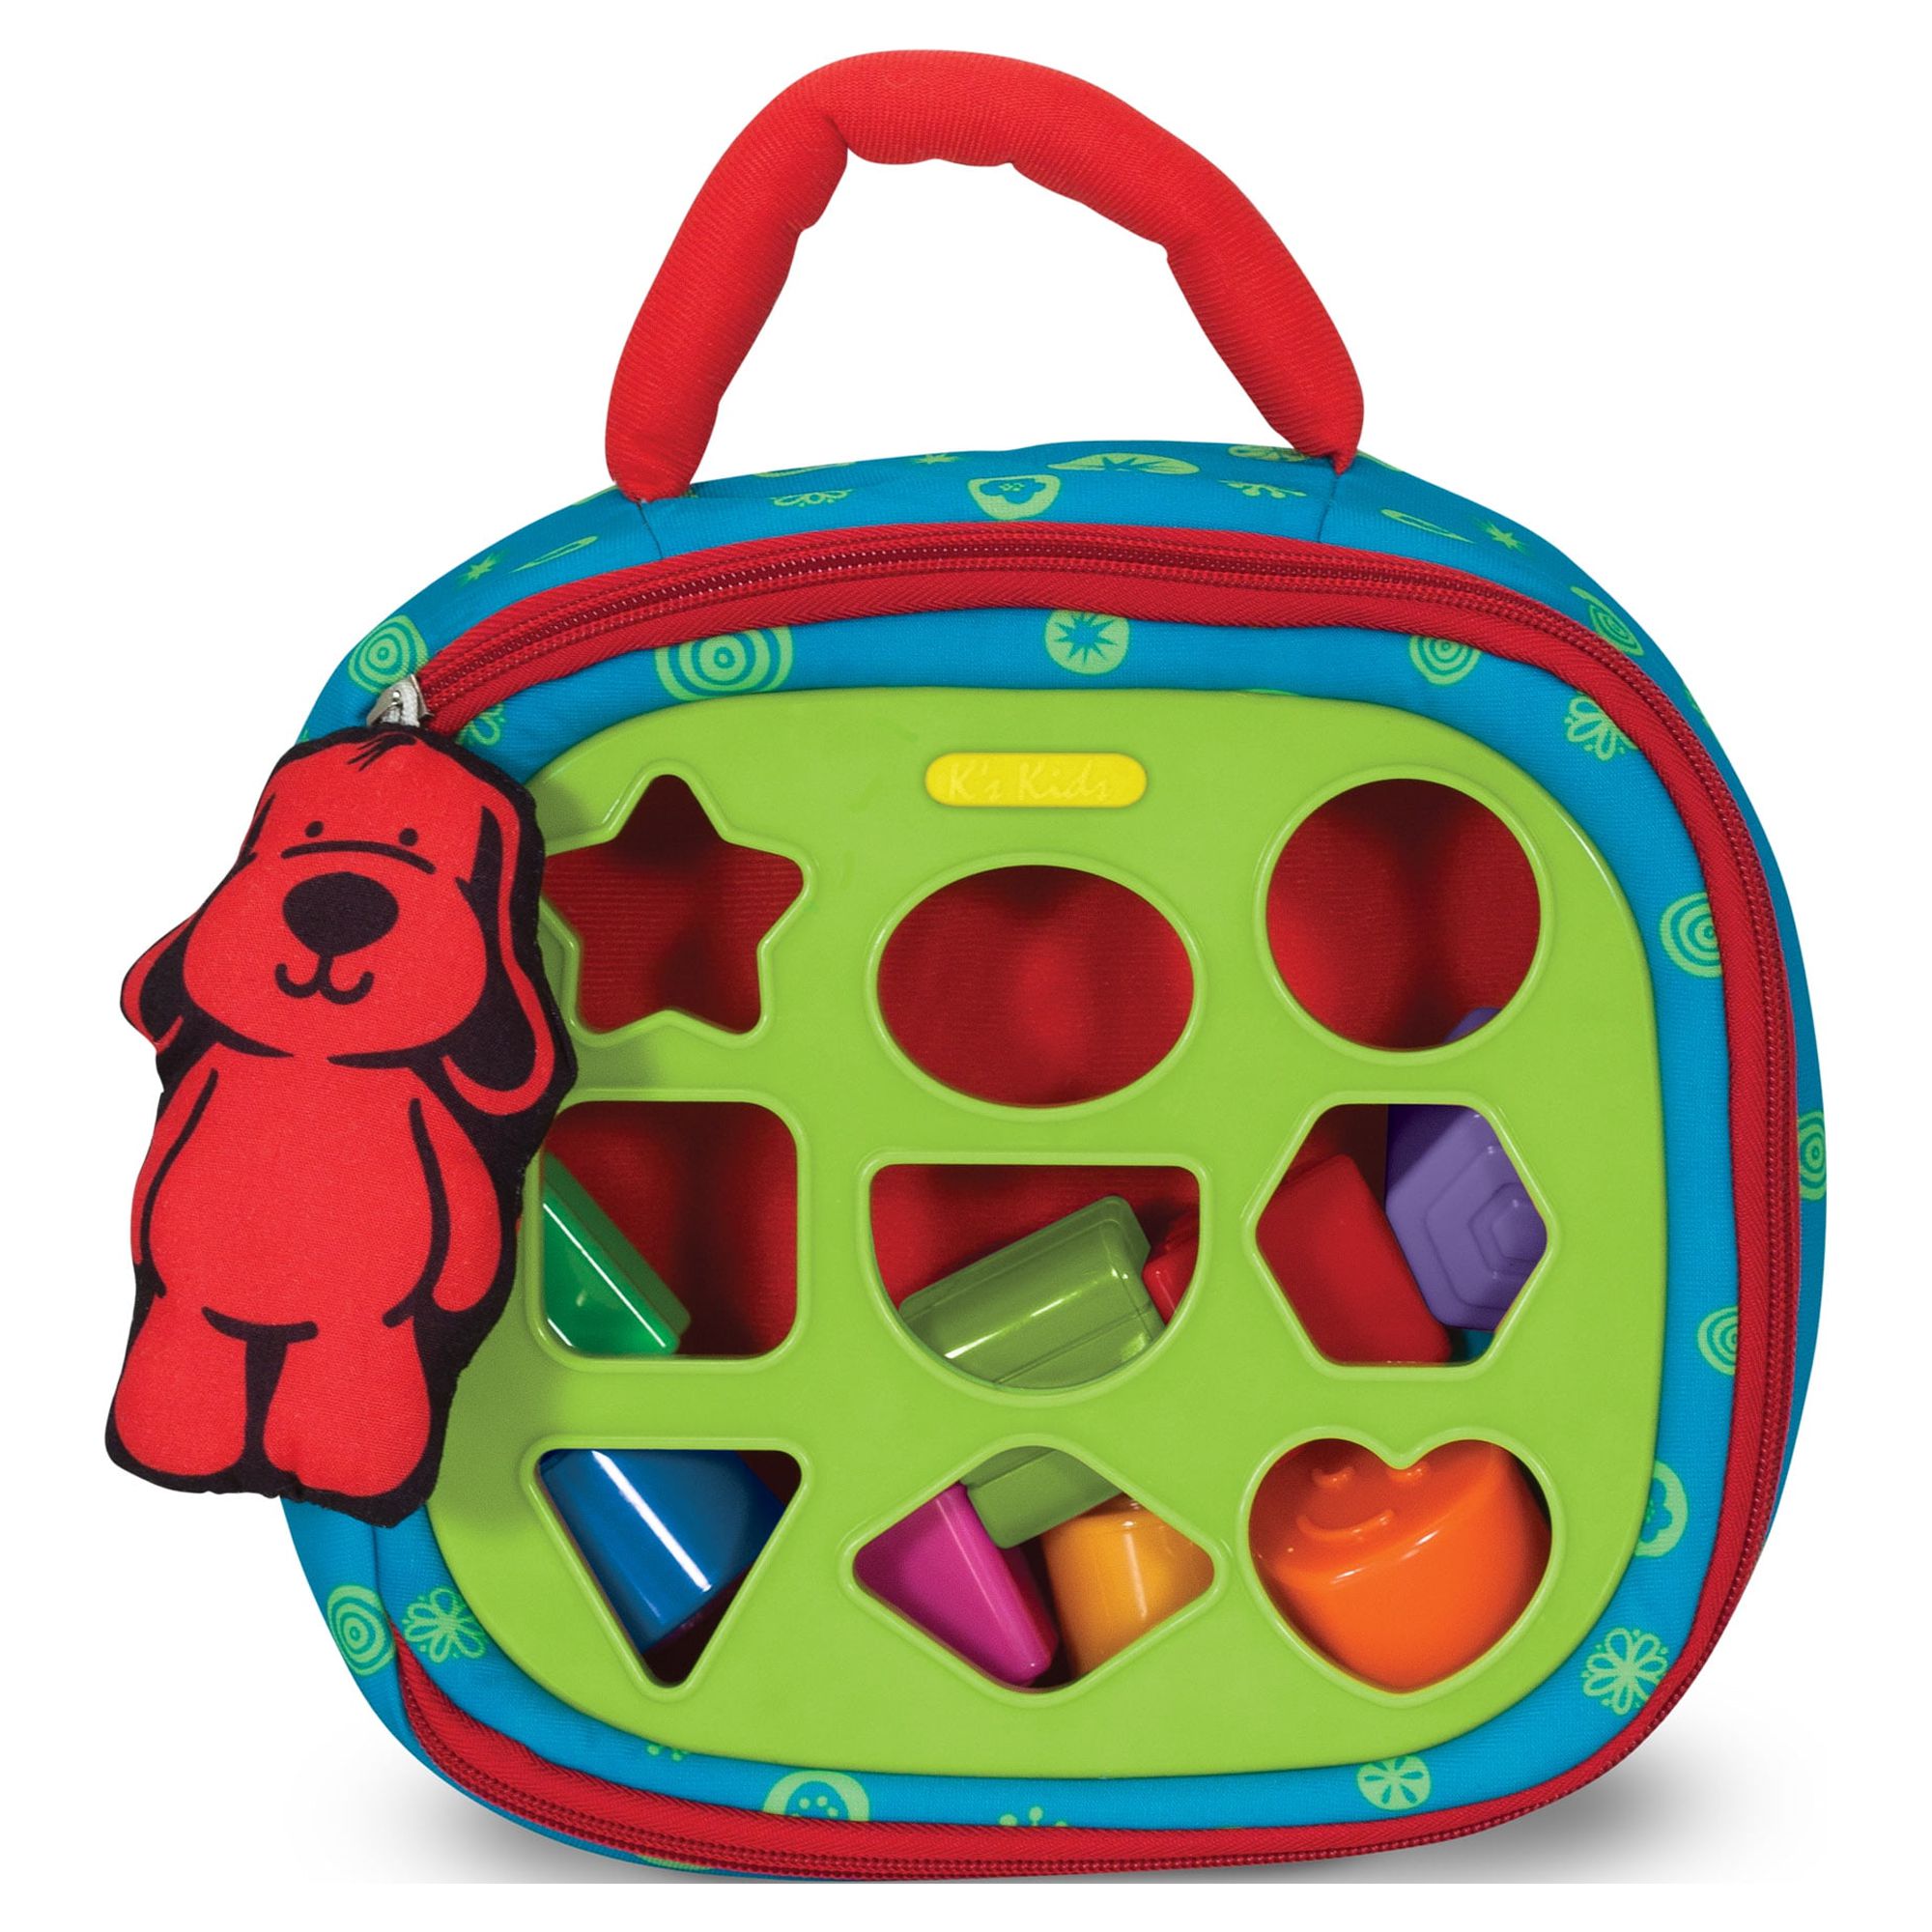 Melissa & Doug K's Kids Take-Along Shape Sorter Baby Toy With 2-Sided Activity Bag and 9 Textured Shape Blocks - image 1 of 11